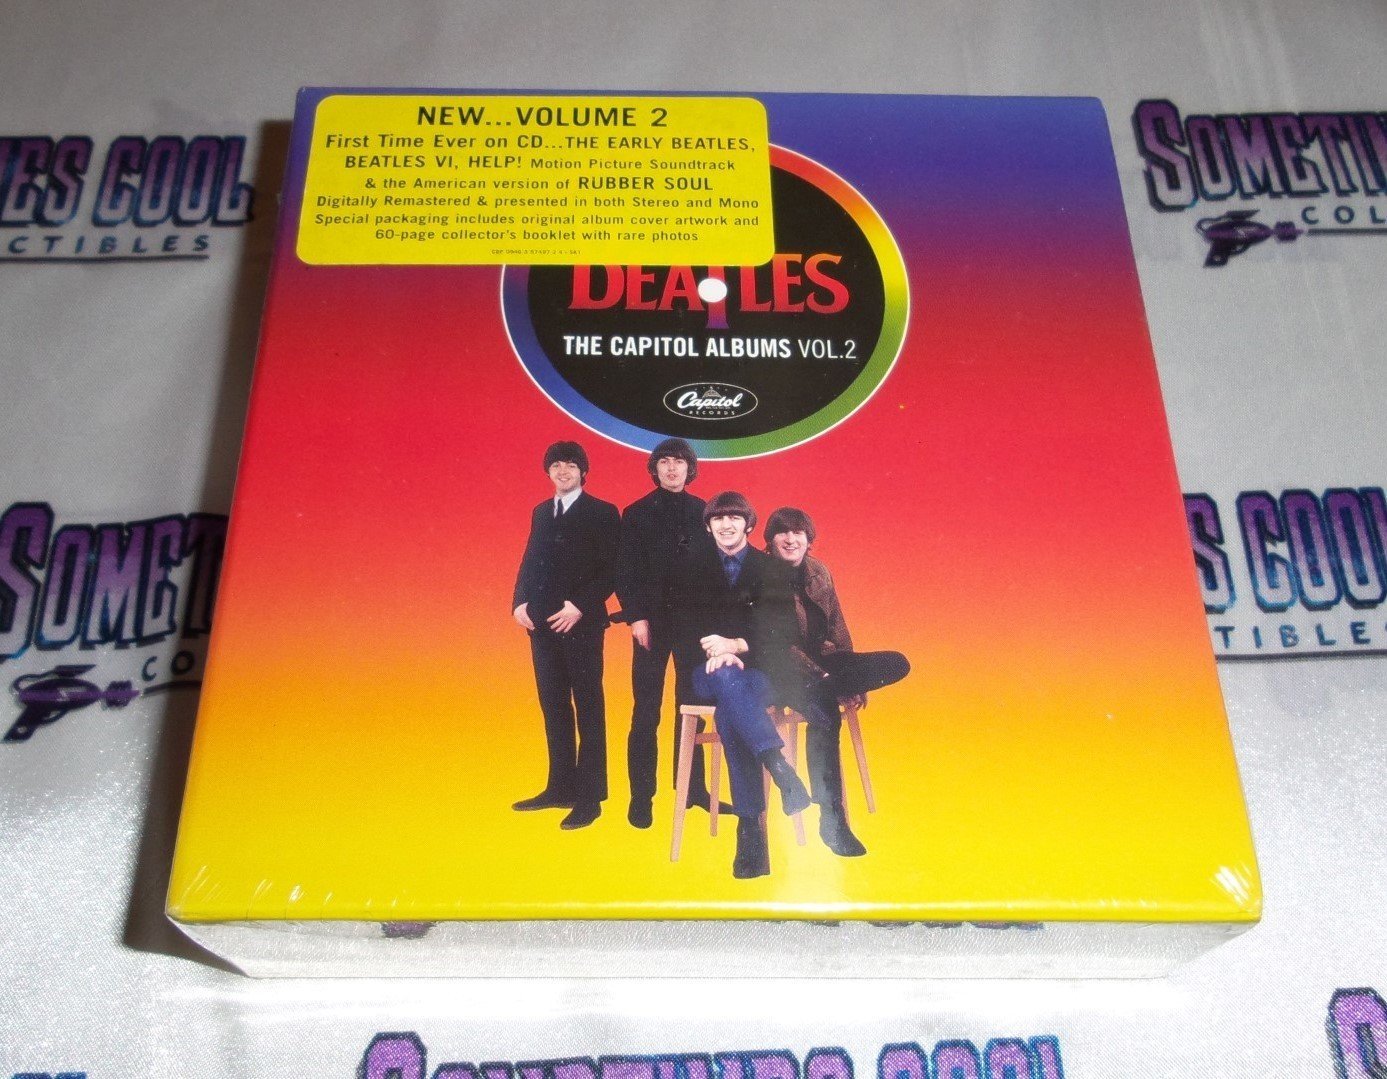 the Beatles : the Capitol Records Volume 2 Box Set